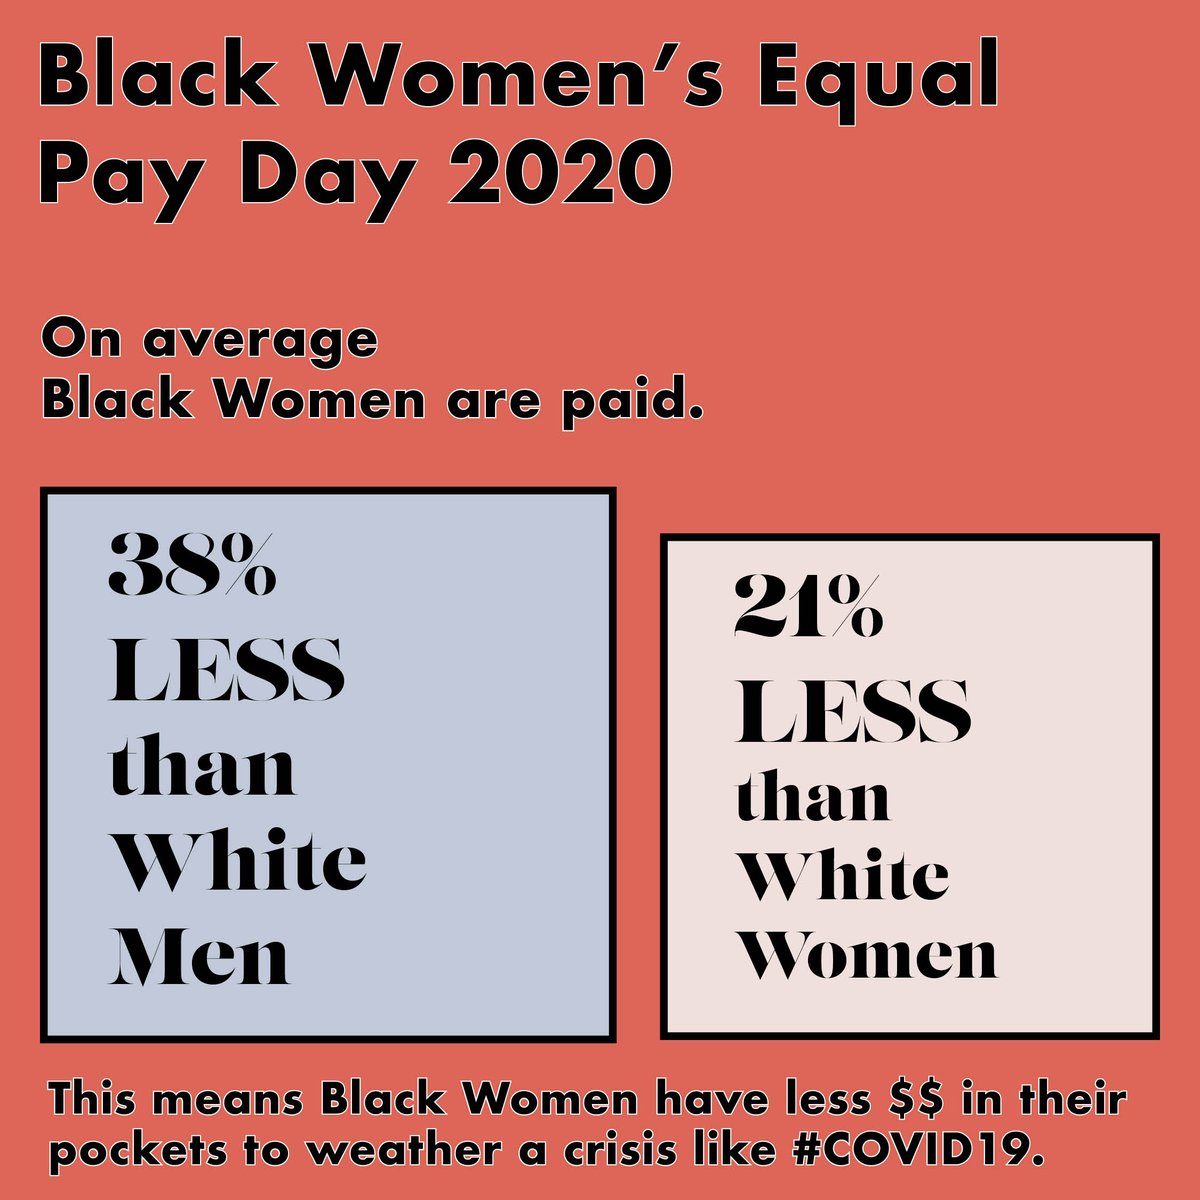 Today is #BlackWomensEqualPayDay ! The wage gap in the US affects Black women disproportionately due to the unique intersectionality of sexism and racism experienced in the workplace. #BlackWomensEqualPay